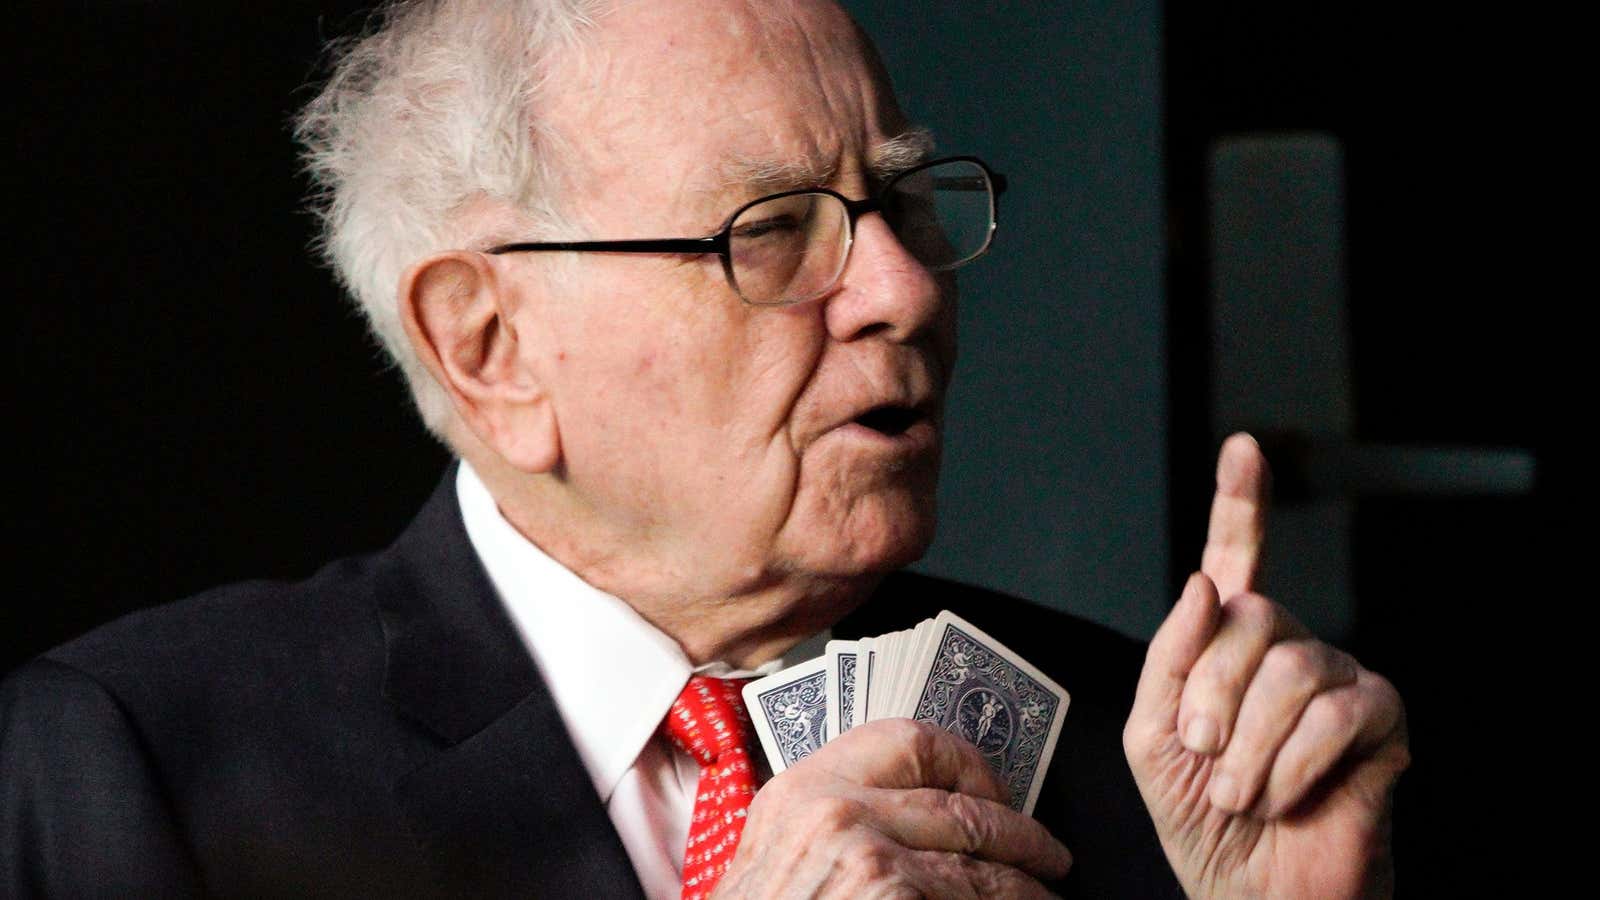 When you bet against Buffett, you (usually) lose.